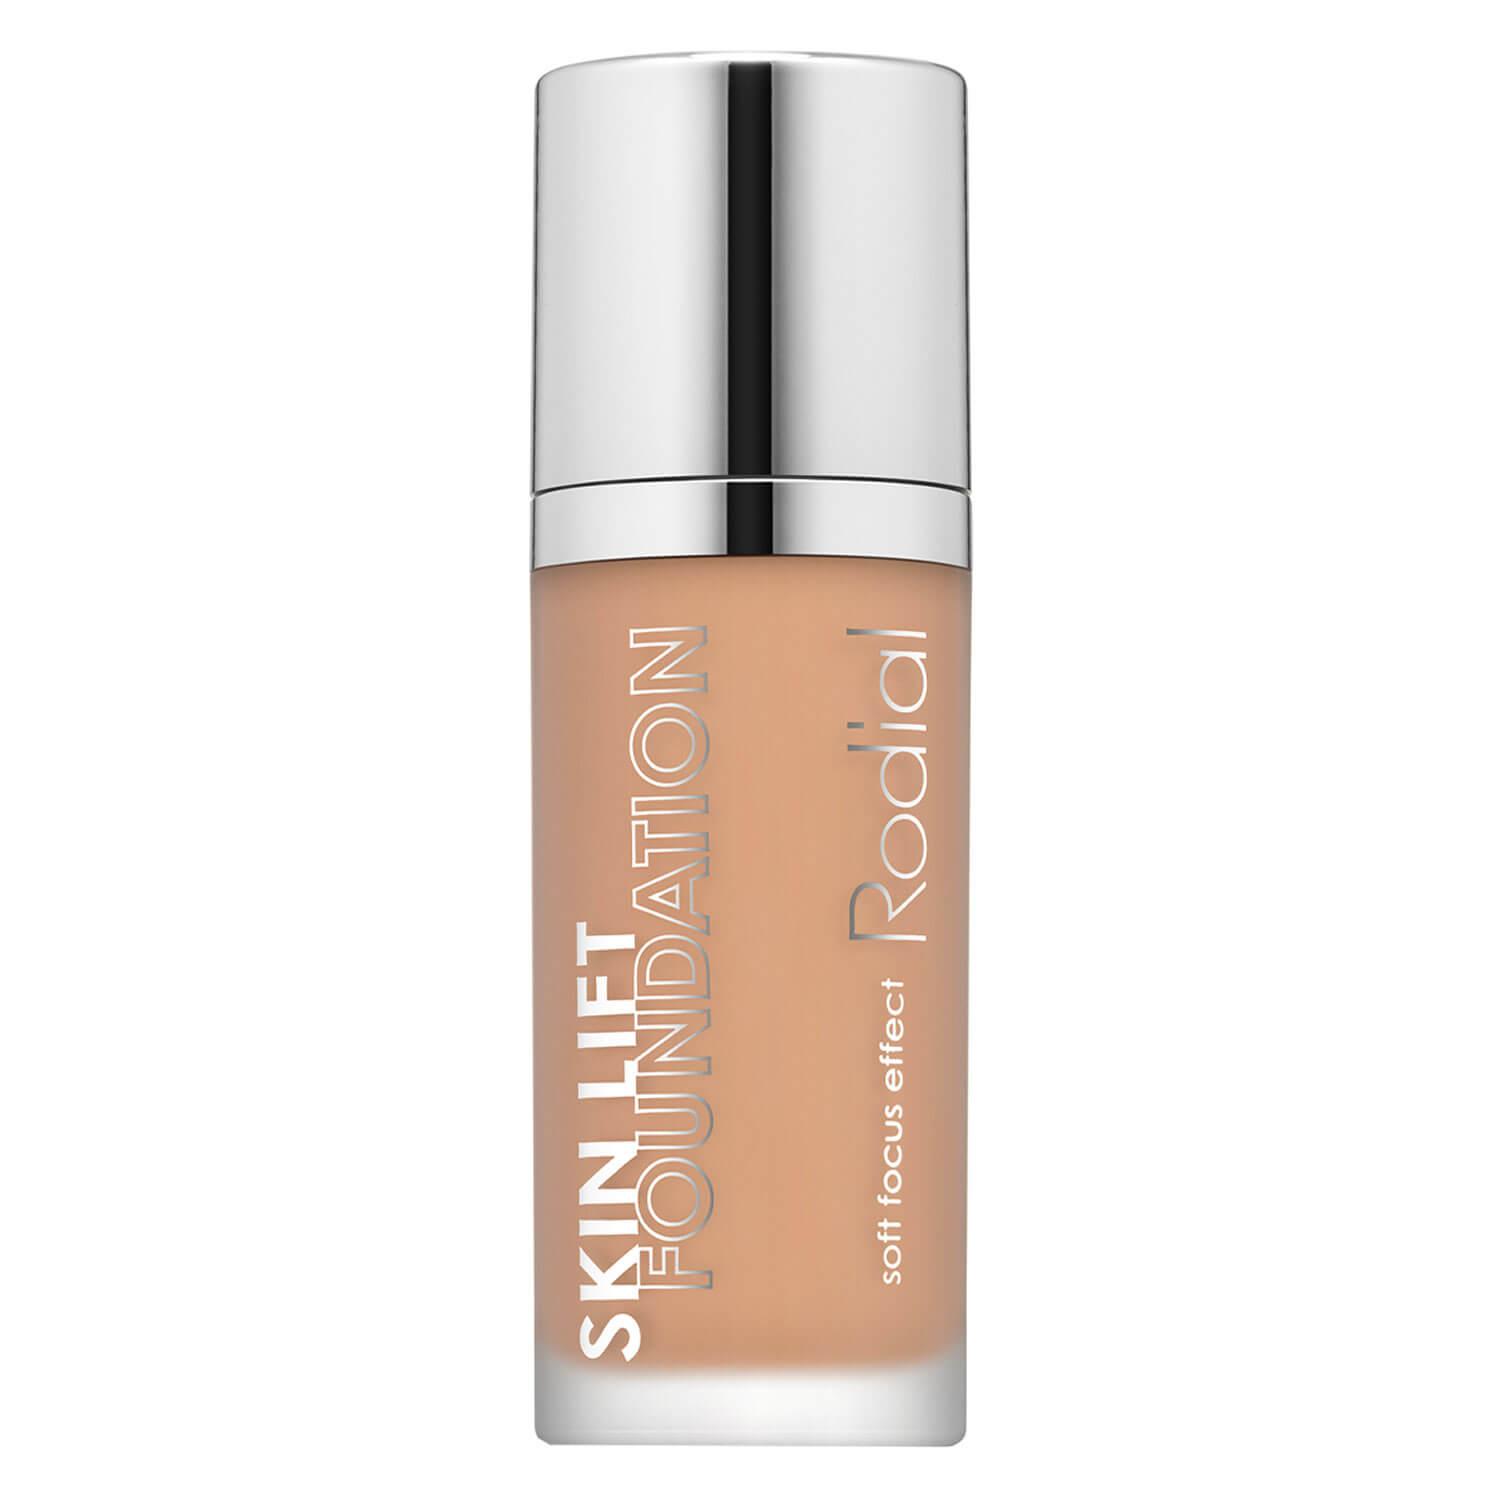 Rodial Make-up - Skin Lift Foundation Toffee